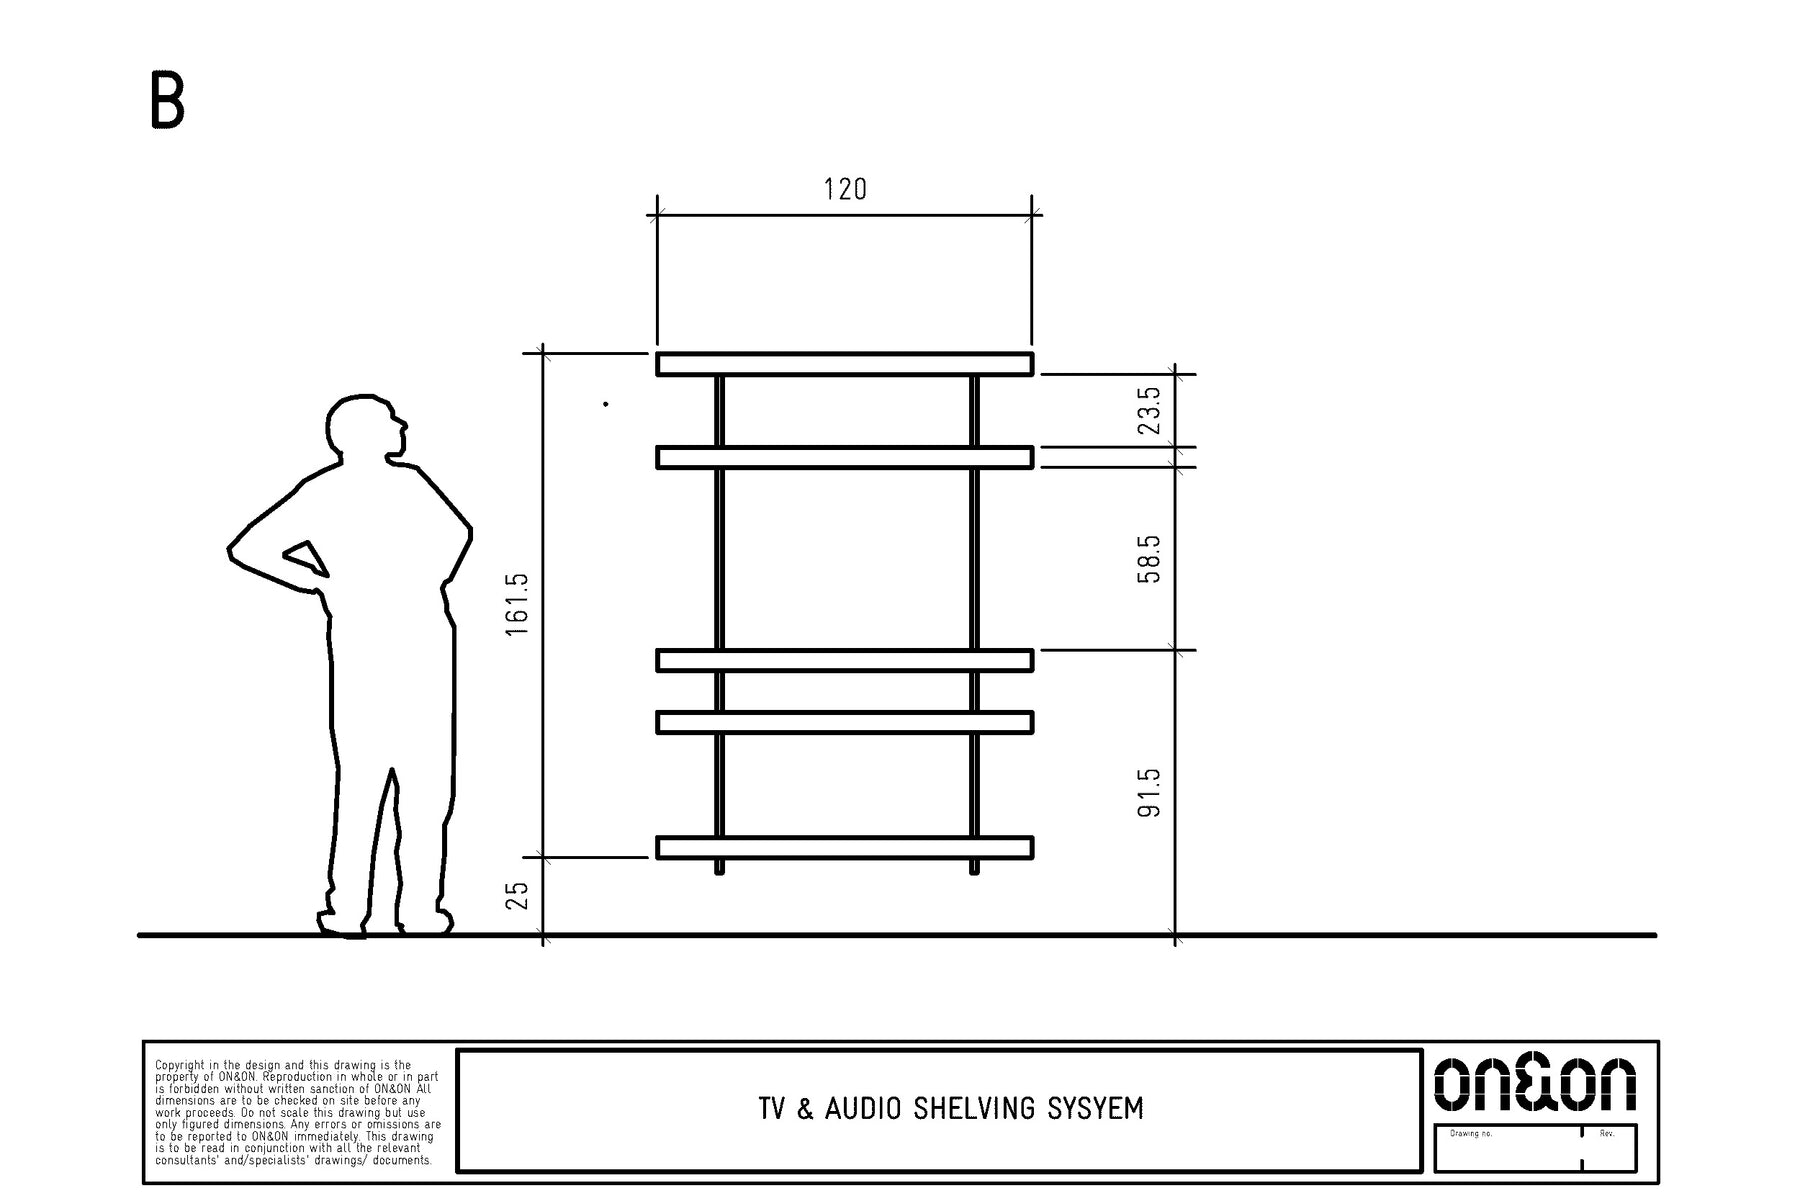 TV wall system drawing B with sizes